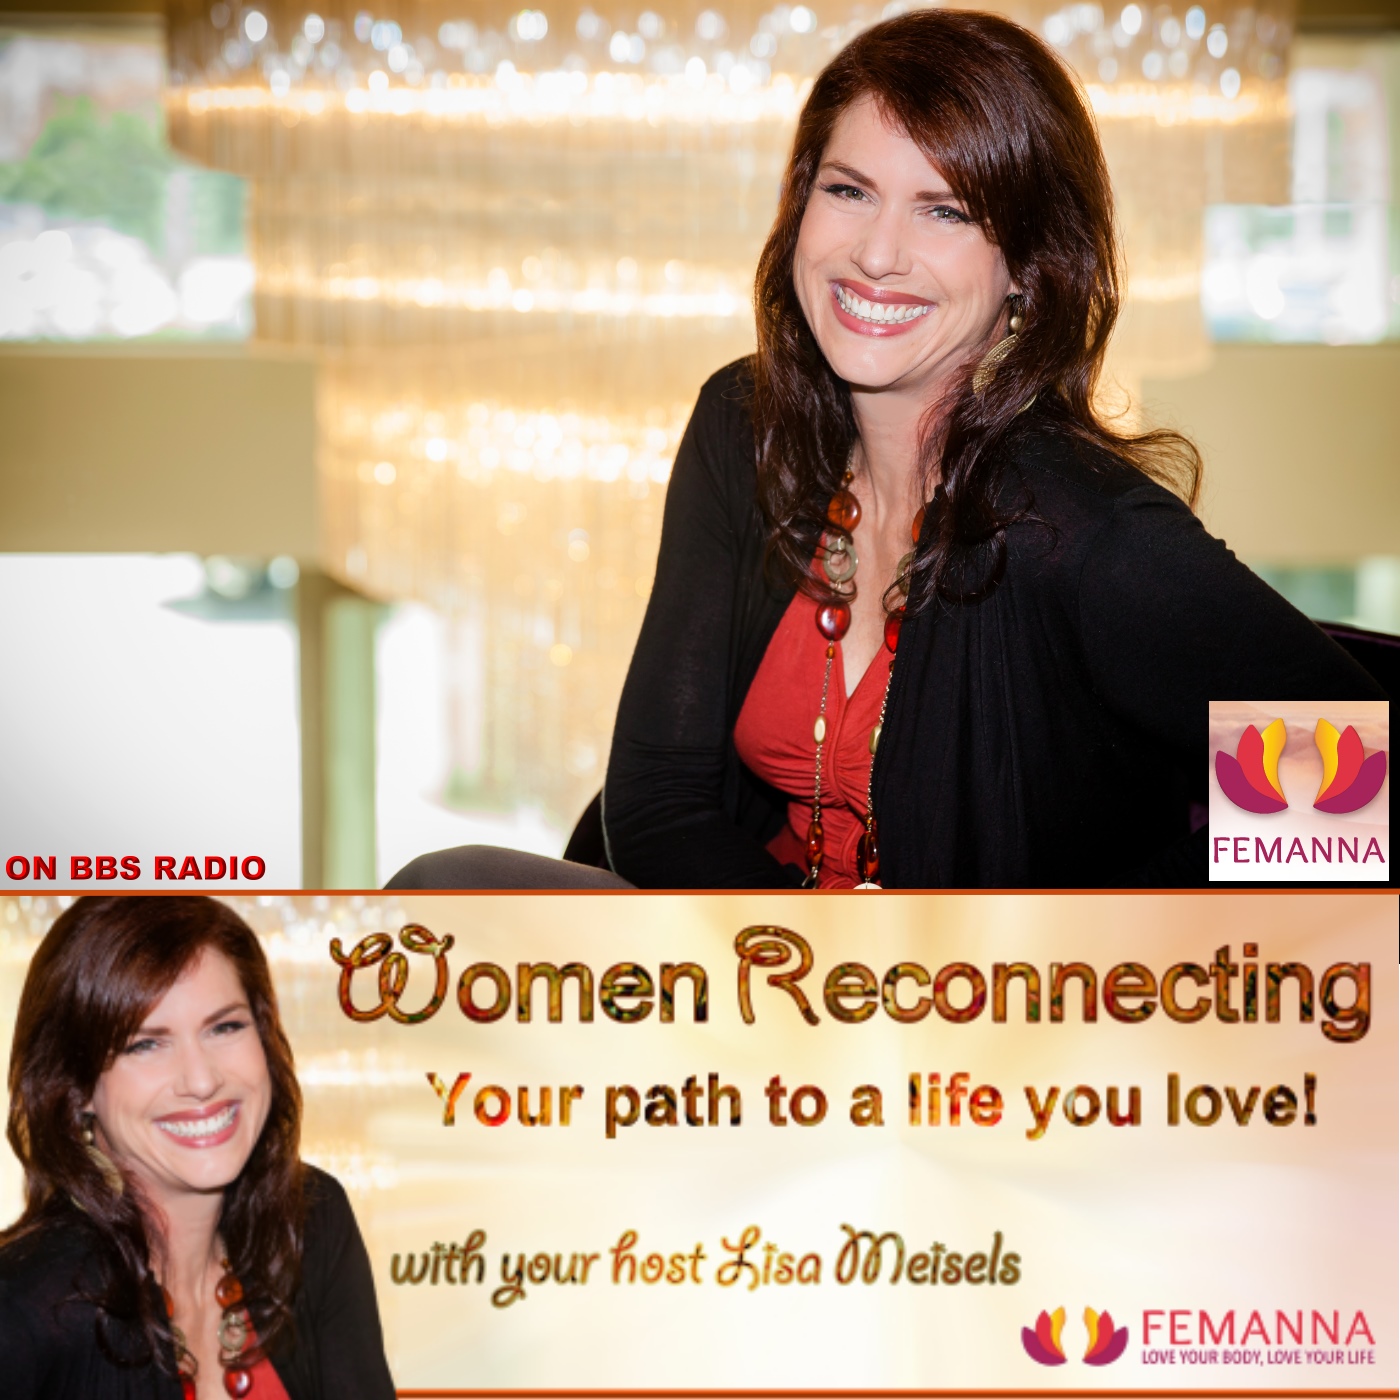 Women Reconnecting with Lisa Meisels:BBS Radio, BBS Network Inc.